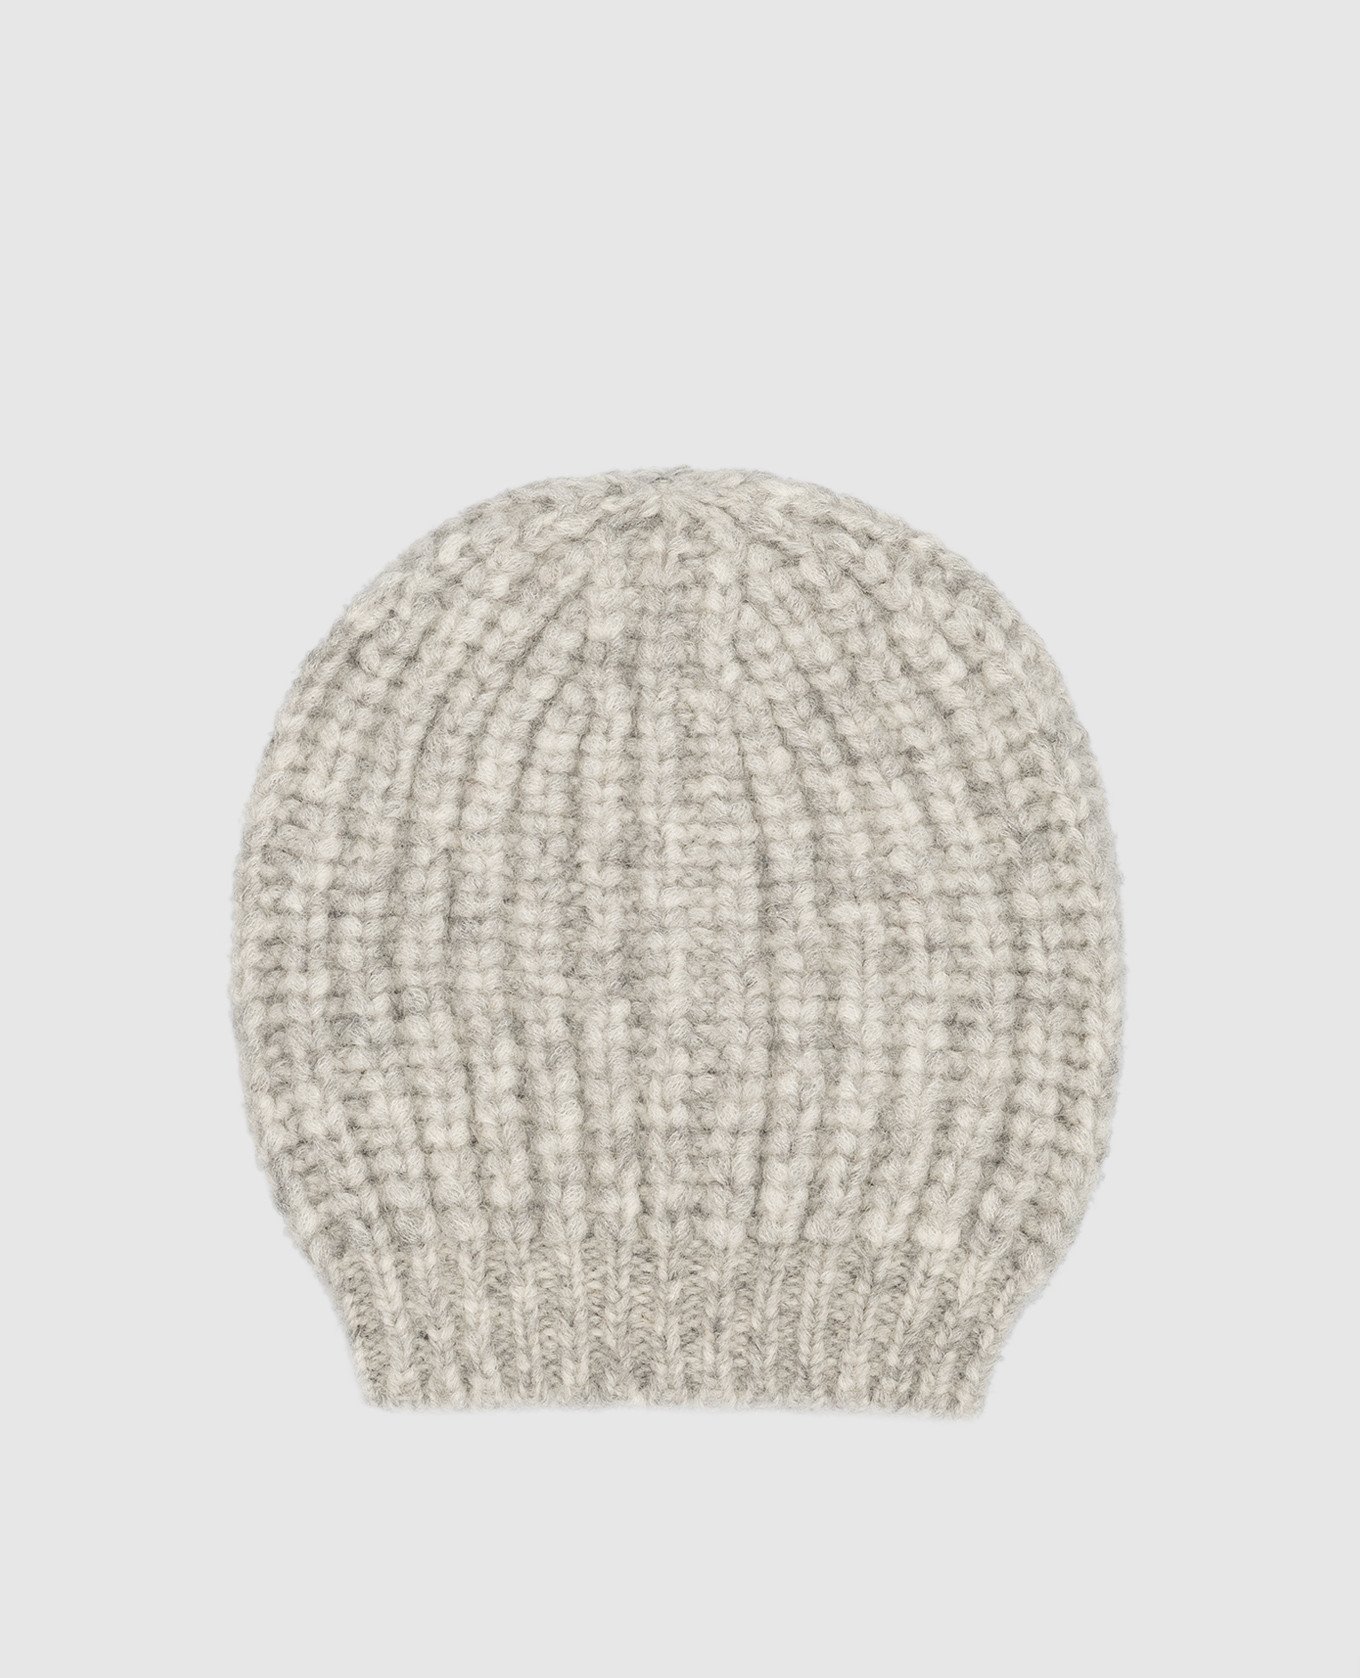 Gray cap in a textured pattern